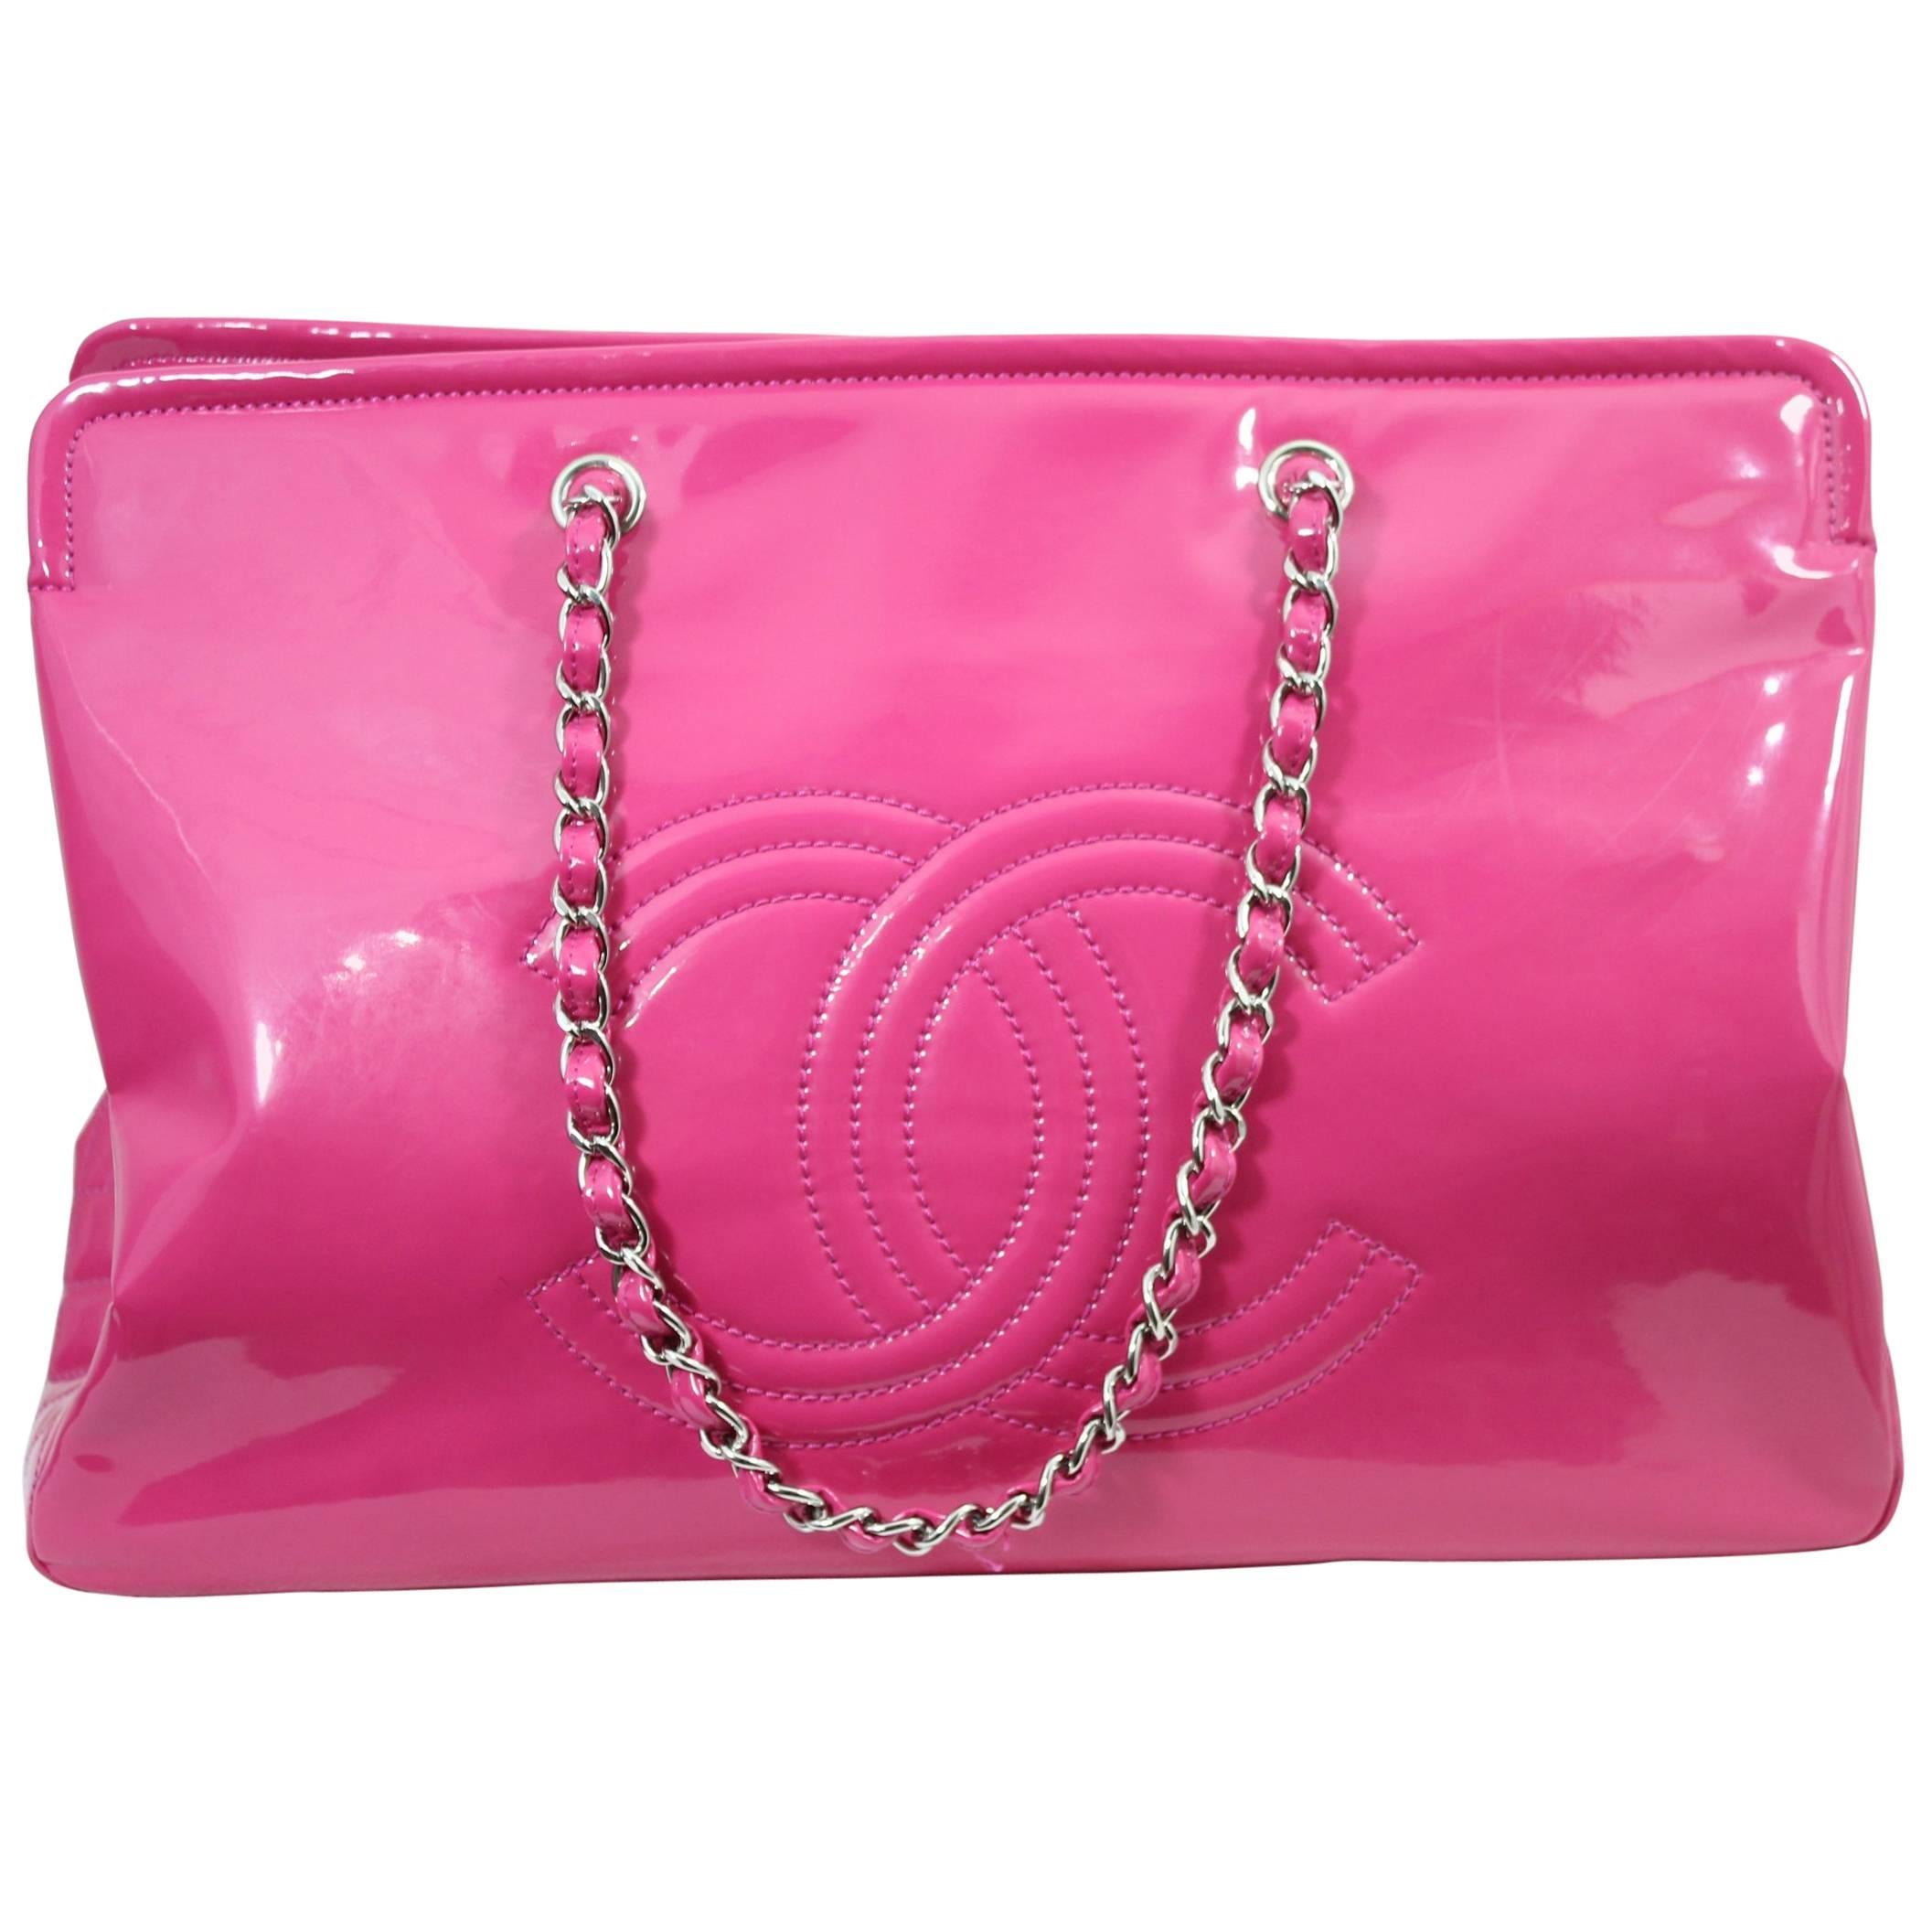 Lovely Chanel Flashy Patented Leather Pink Bag. Big size